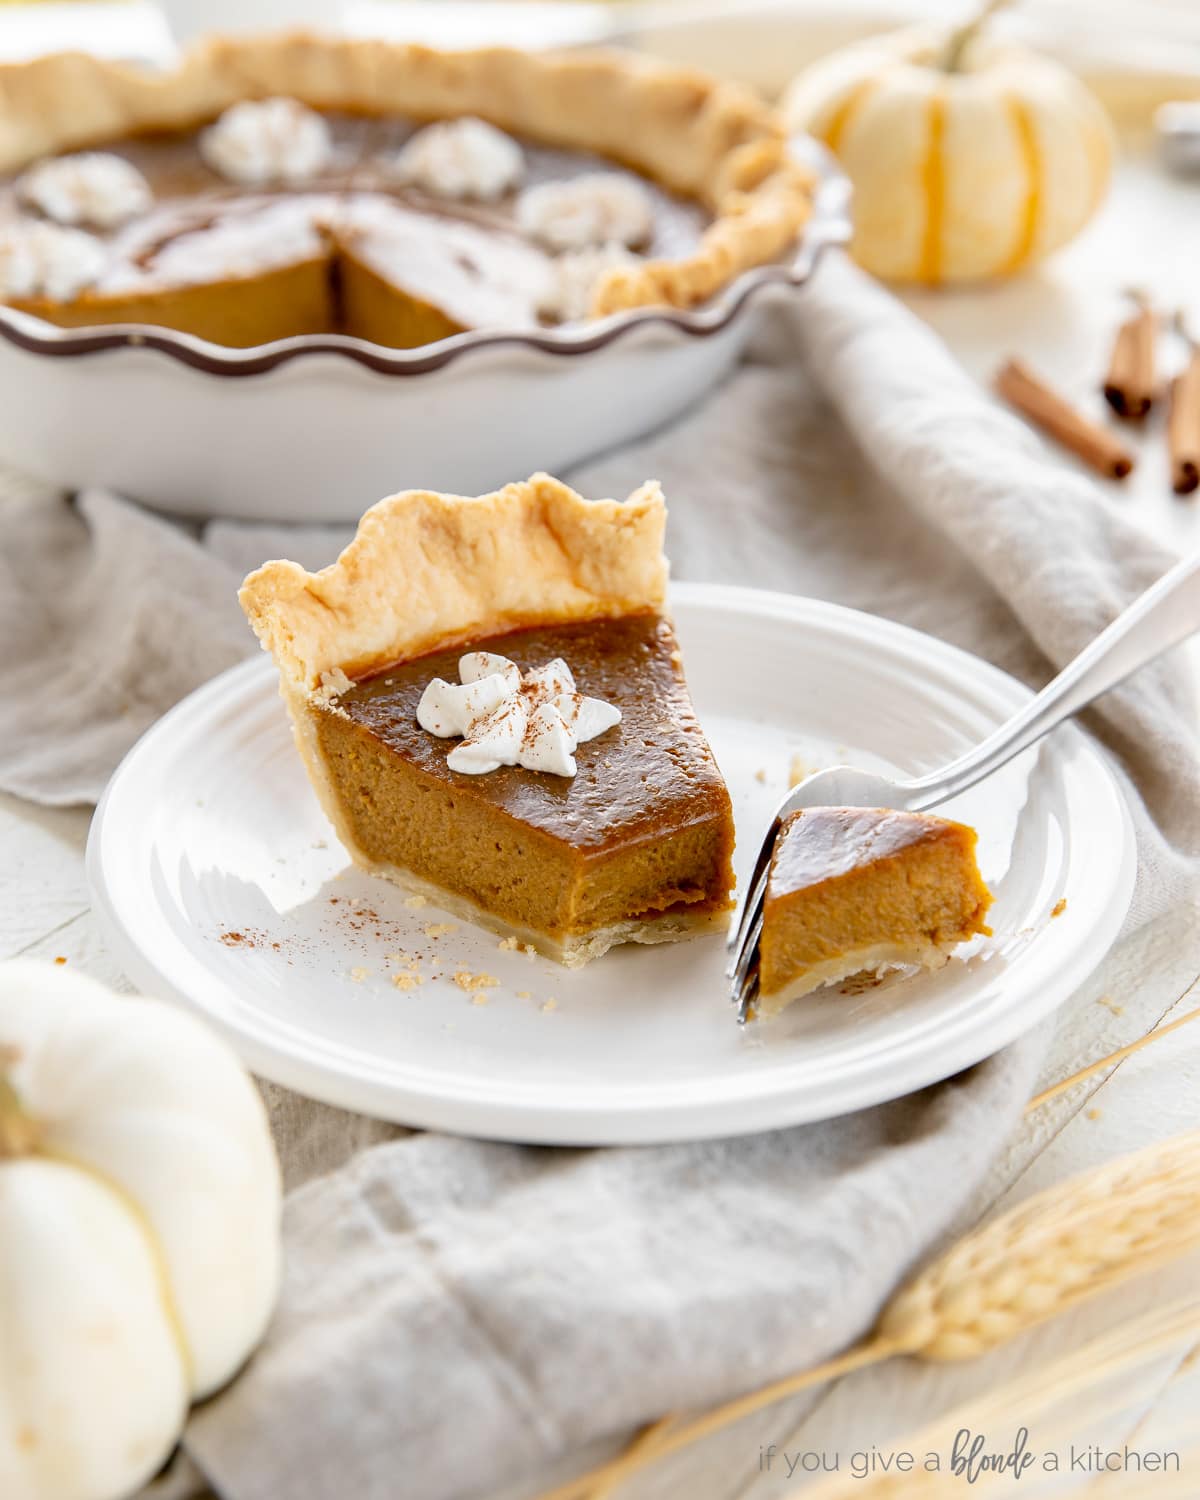 slice of pumpkin pie on plate with fork taking a bite